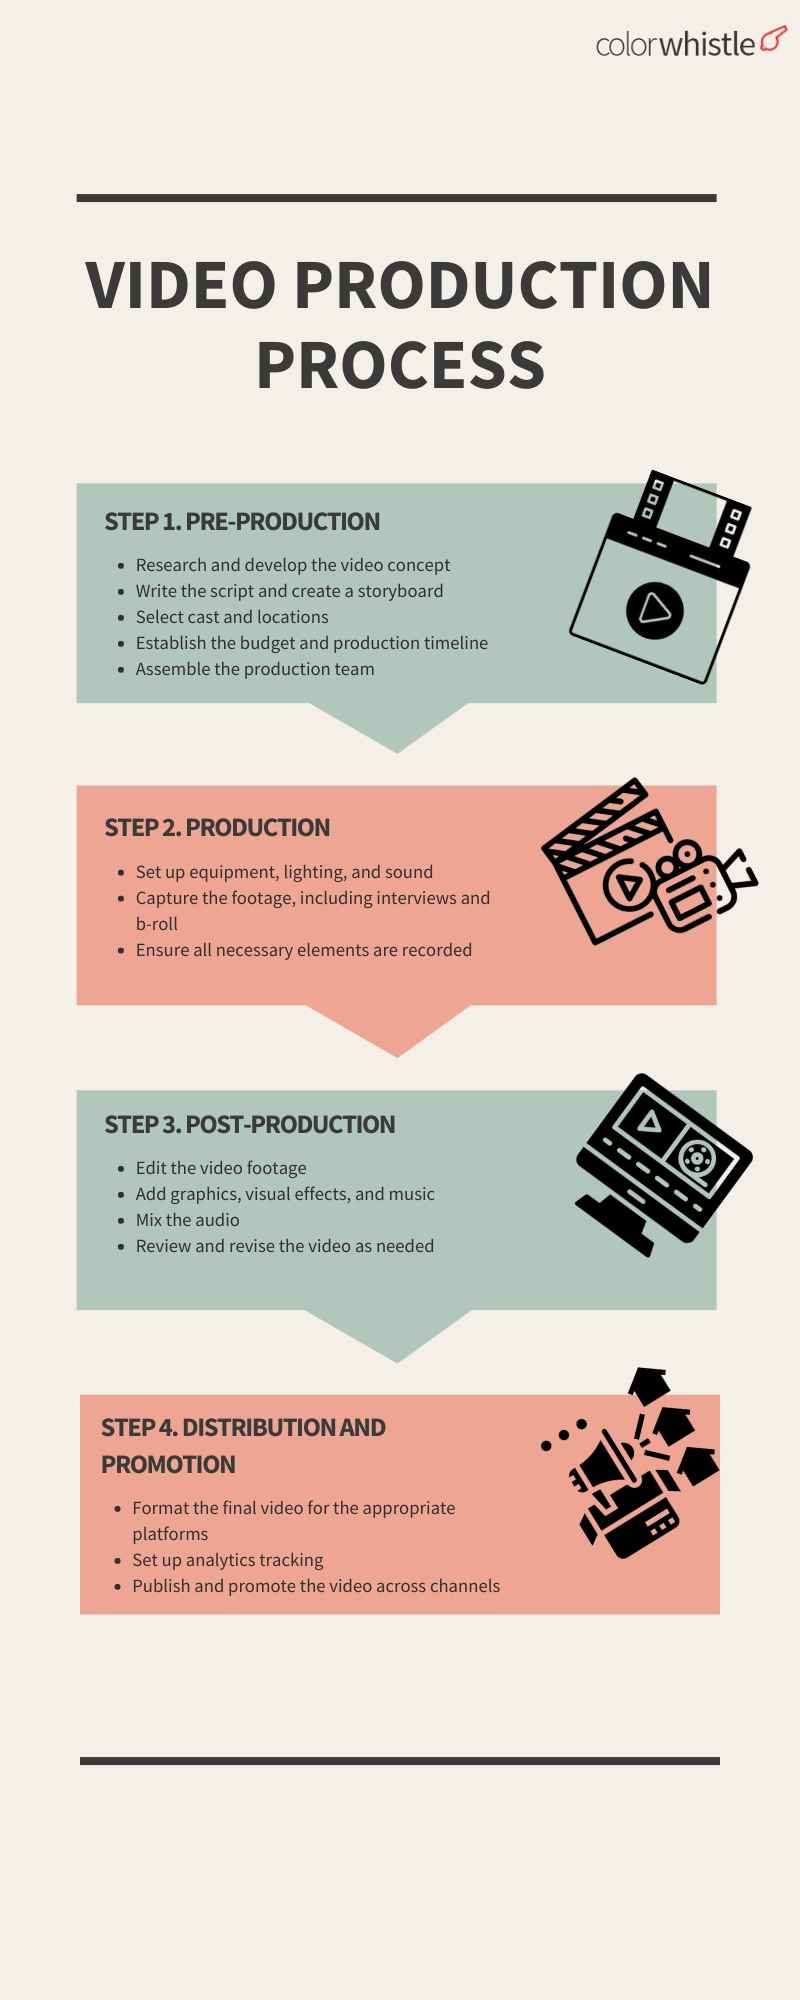 The Ultimate Guide to Video Marketing - Video Production Process - ColorWhistle